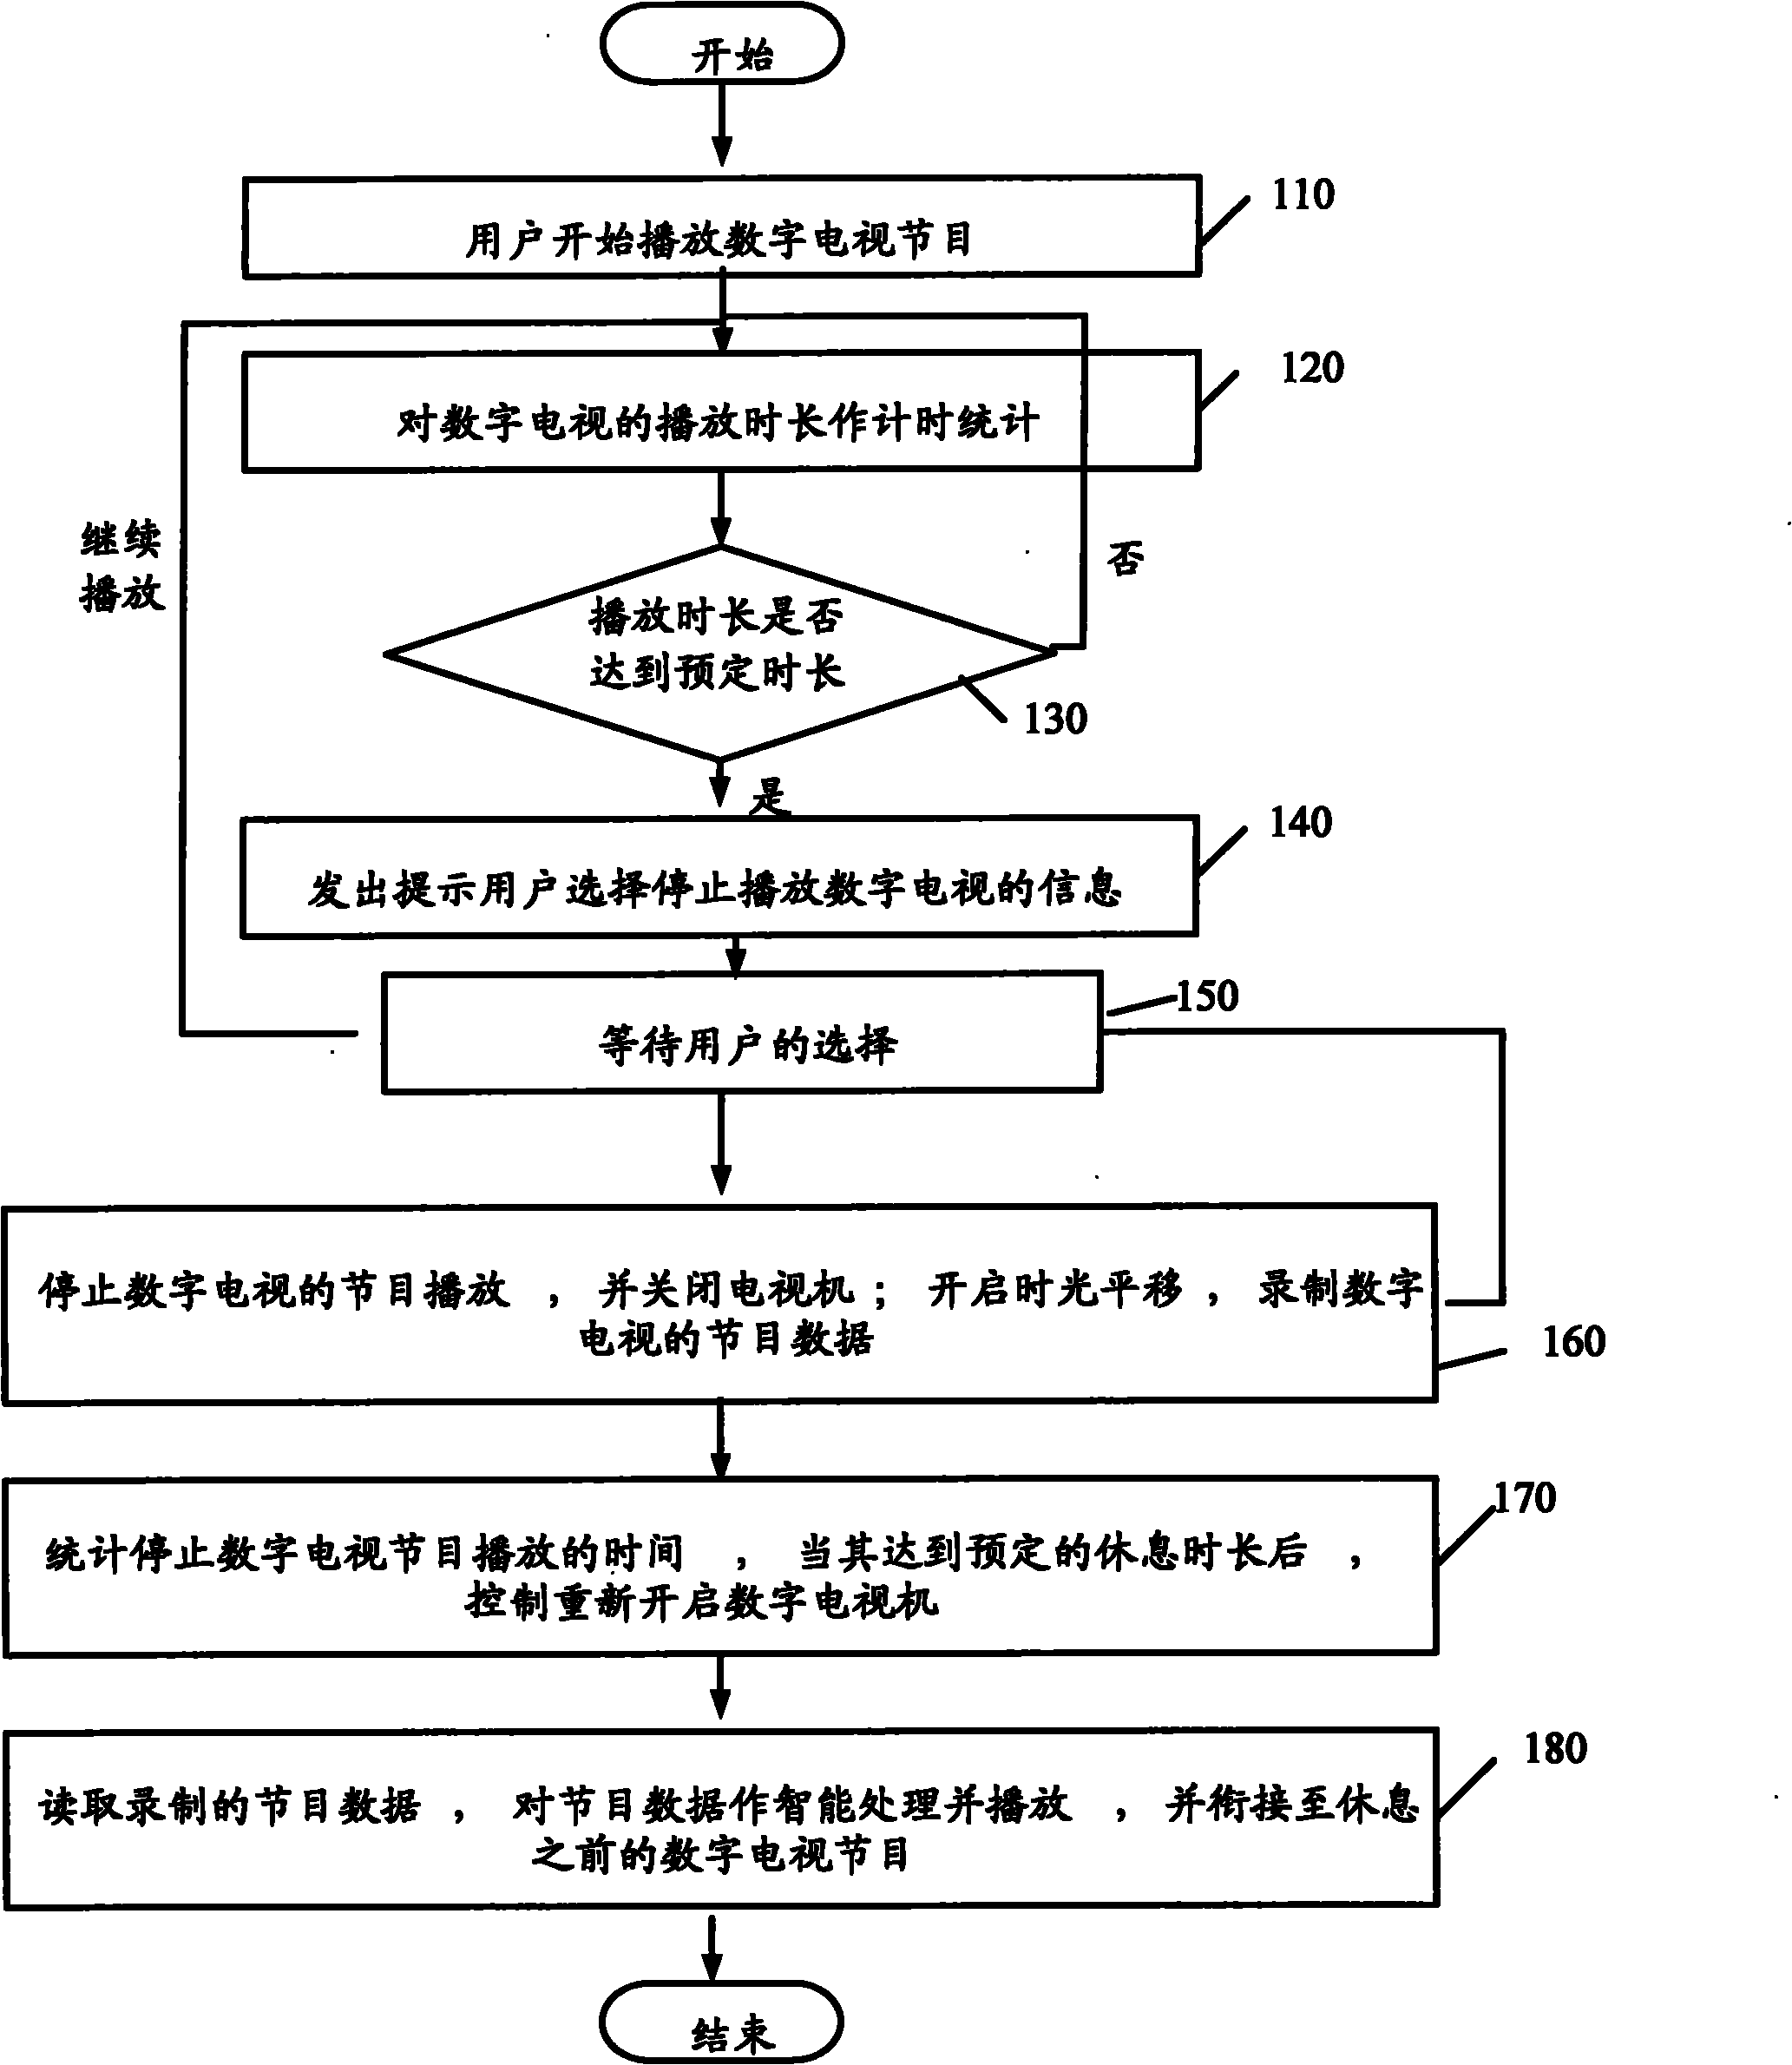 Digital television play management method and system